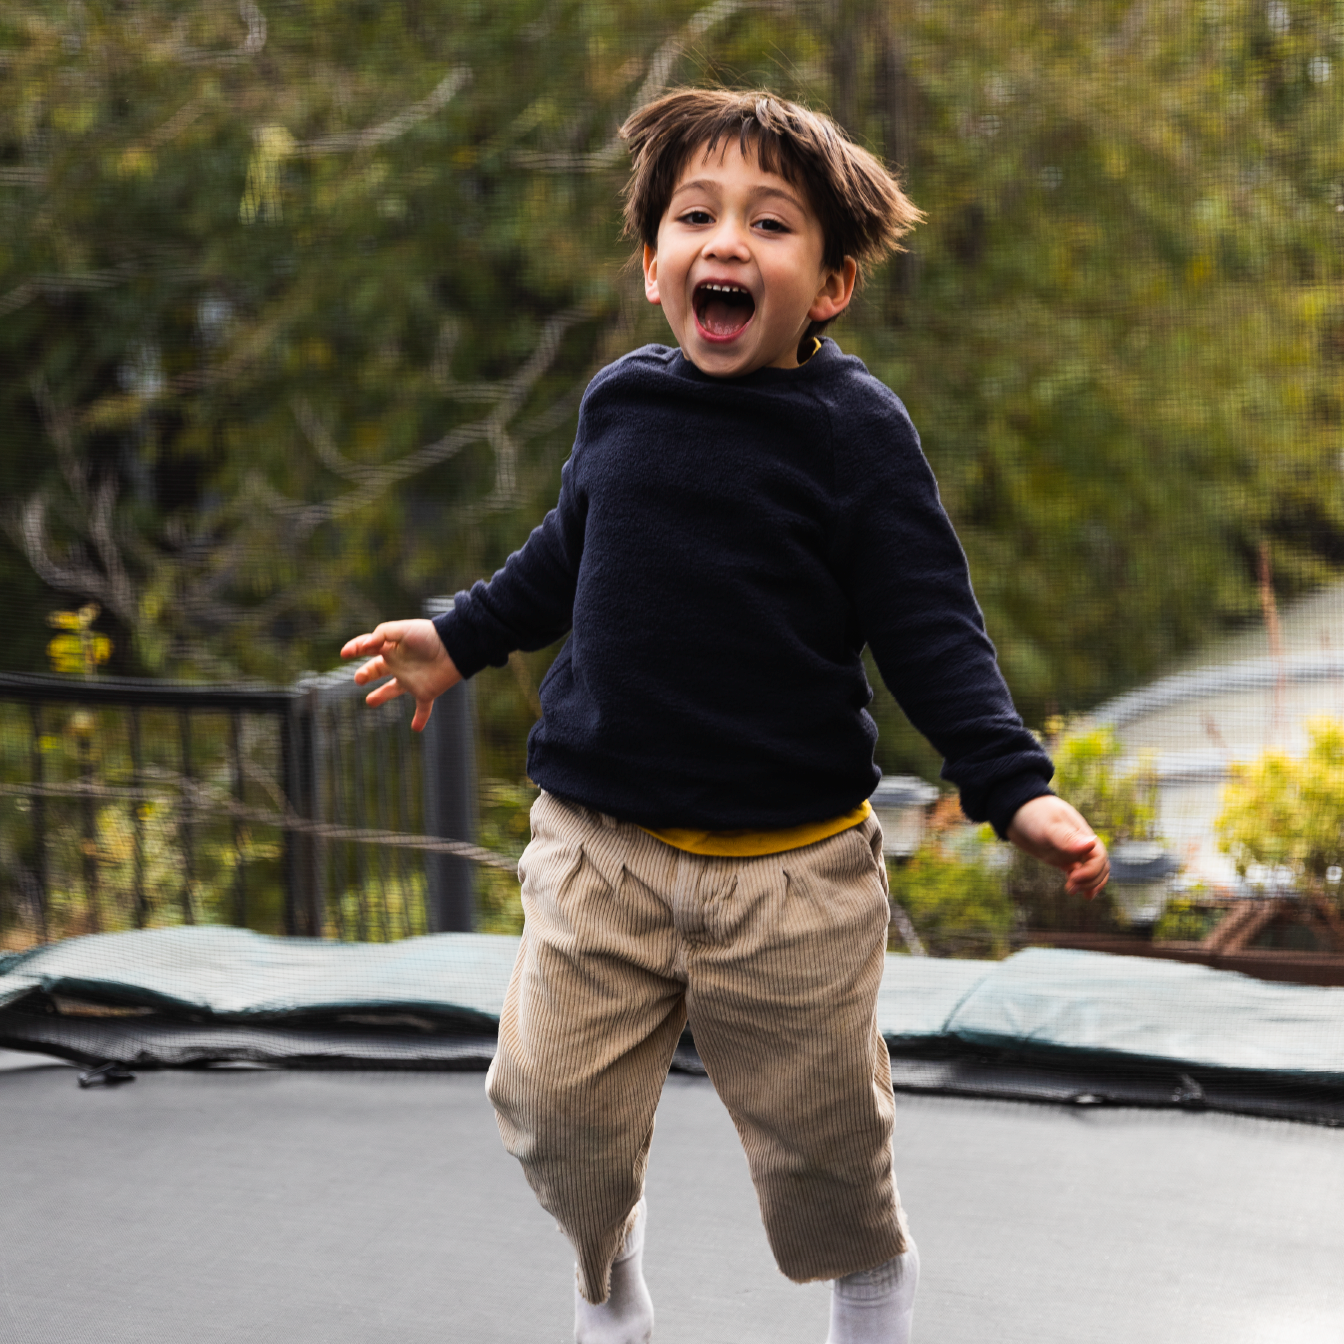 Young boy jumping on an outdoor trampoline and smiling